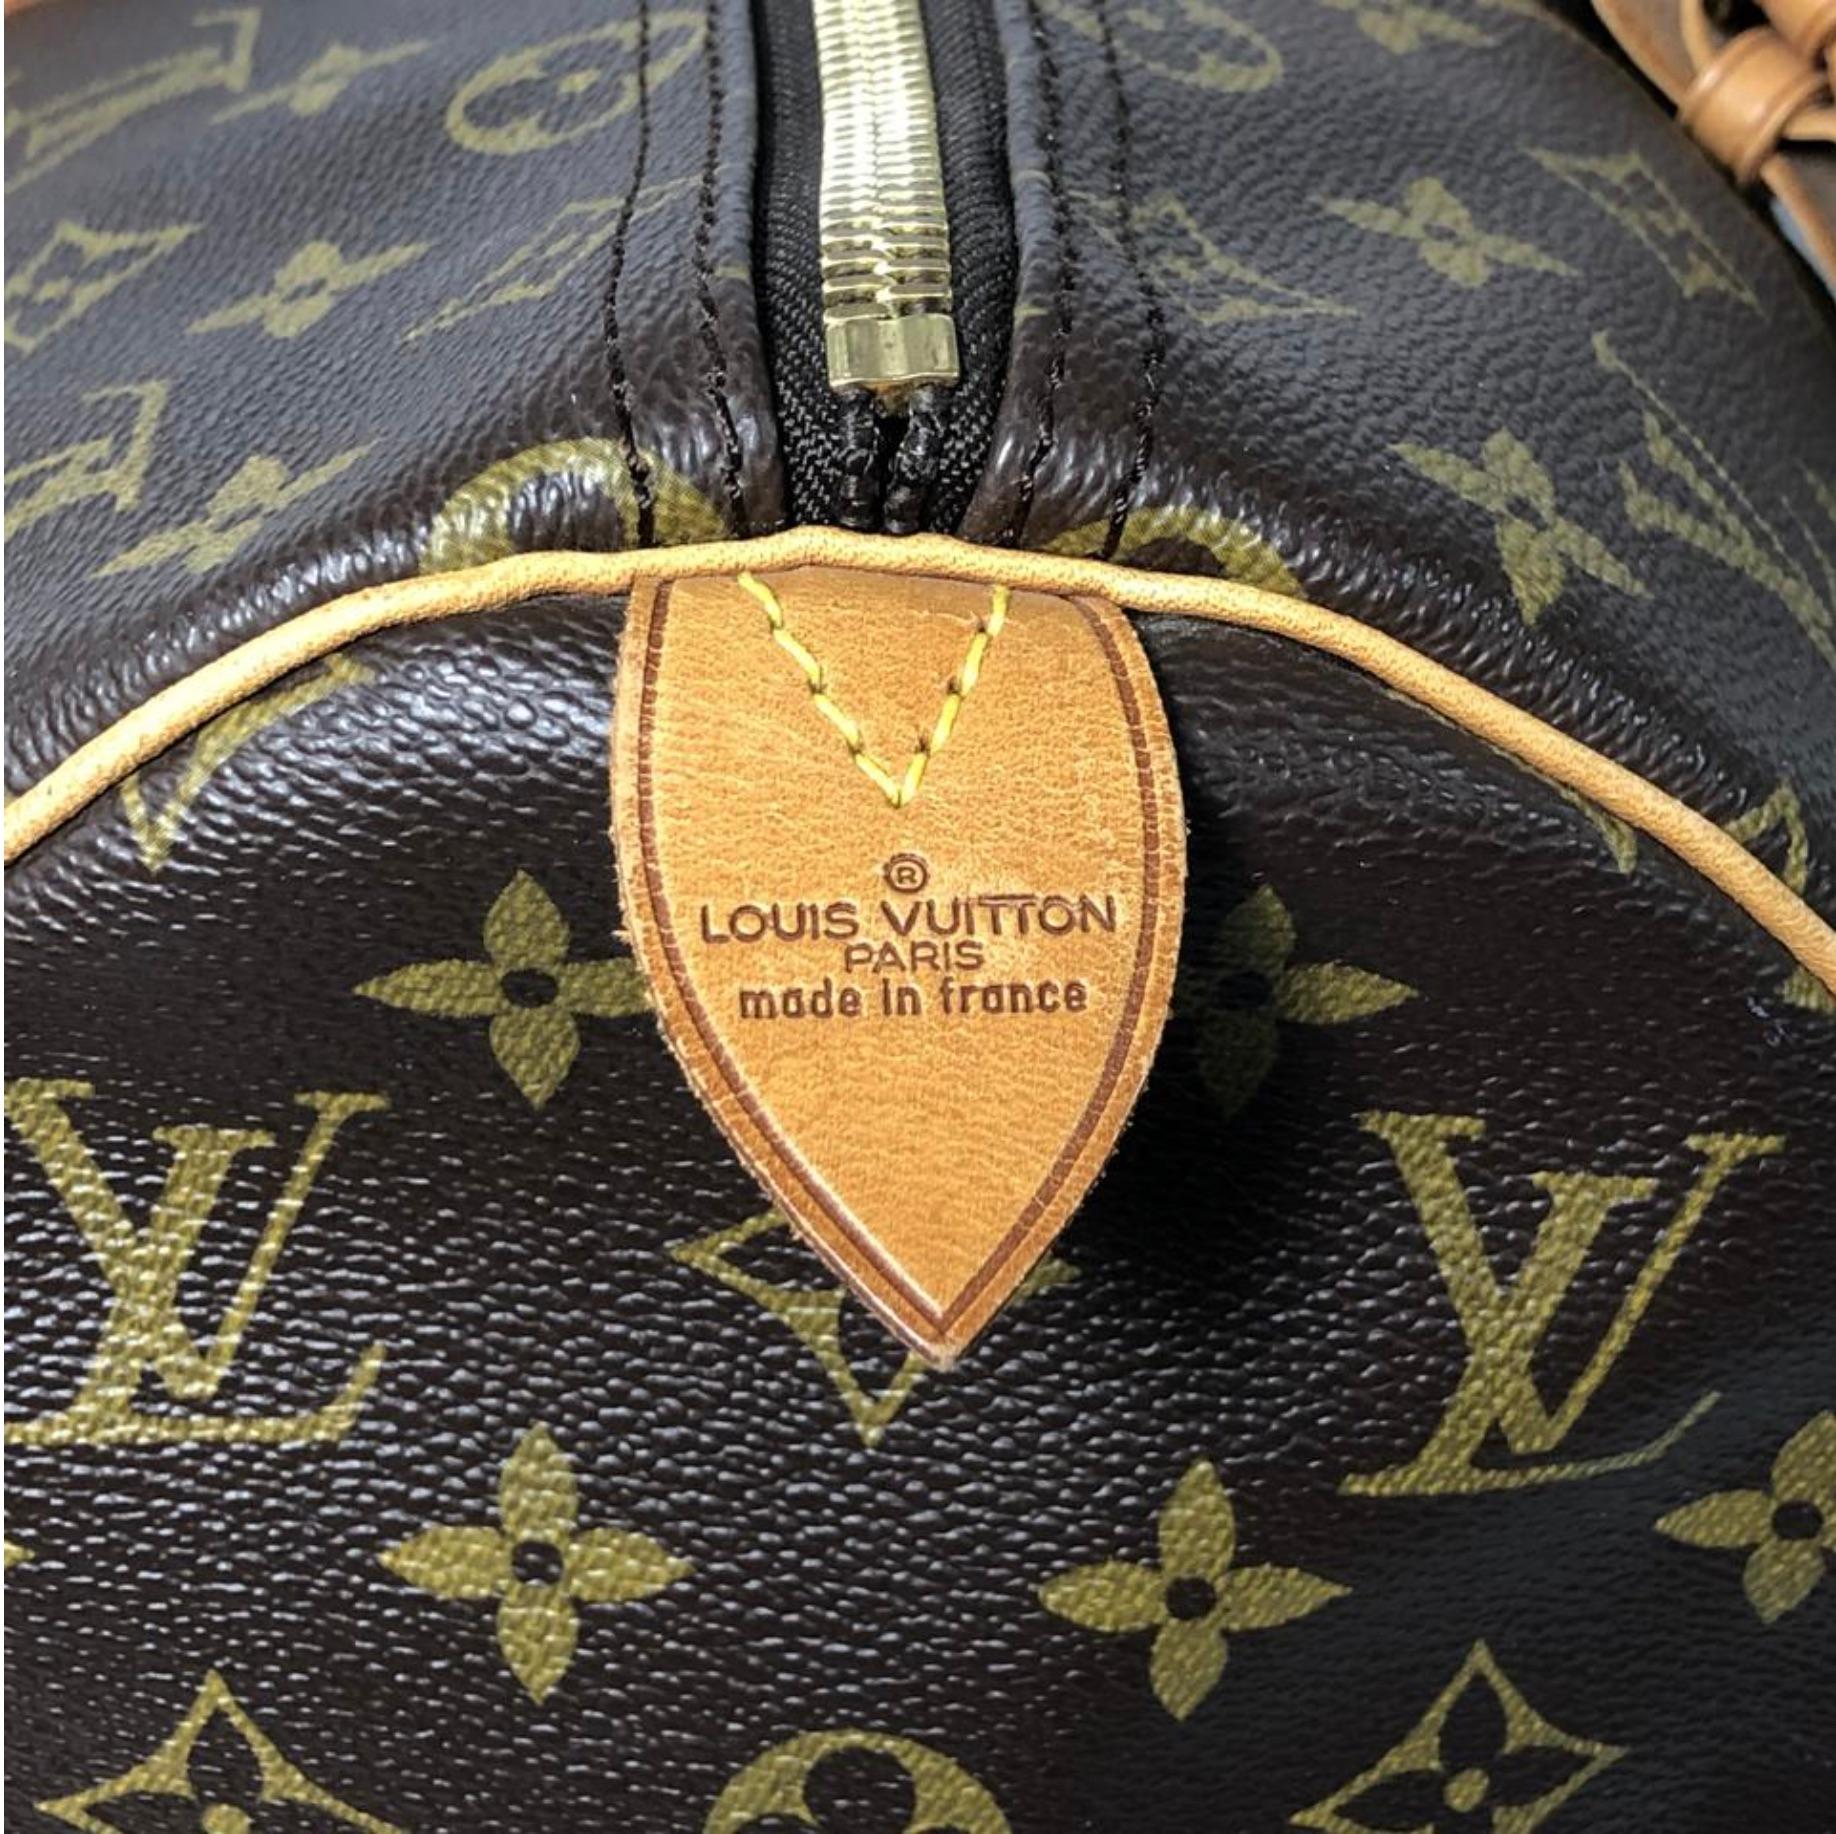  Louis Vuitton Monogram Keepall 45 Top Handle Travel Bag In Good Condition For Sale In Saint Charles, IL